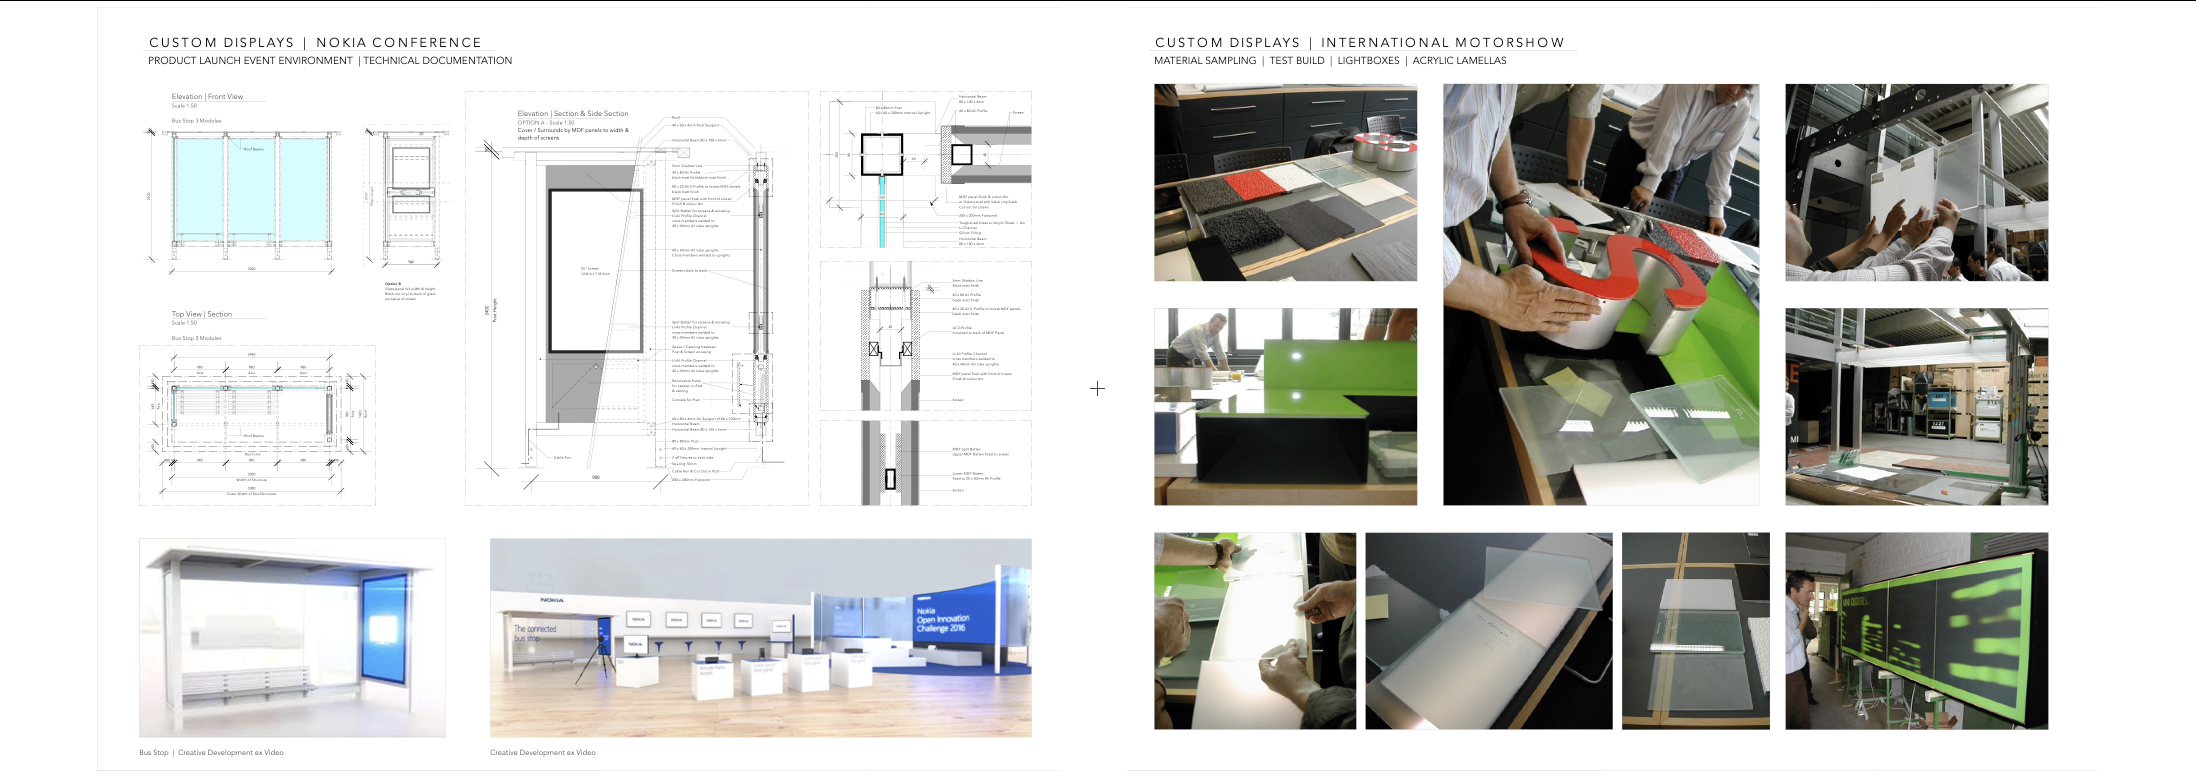 Grethe+Connerth+Twinmotion+Vectorworks+Real Time Visualisations+Archviz+Trade+Show+Expo+Booth+Exhibition+Design+Digital+Banner+Print+Expo+Booth+Gallery+Museum+Retail+Brand+Academy+Commercial+Event+Environment+Displays+Signage+Materials.png